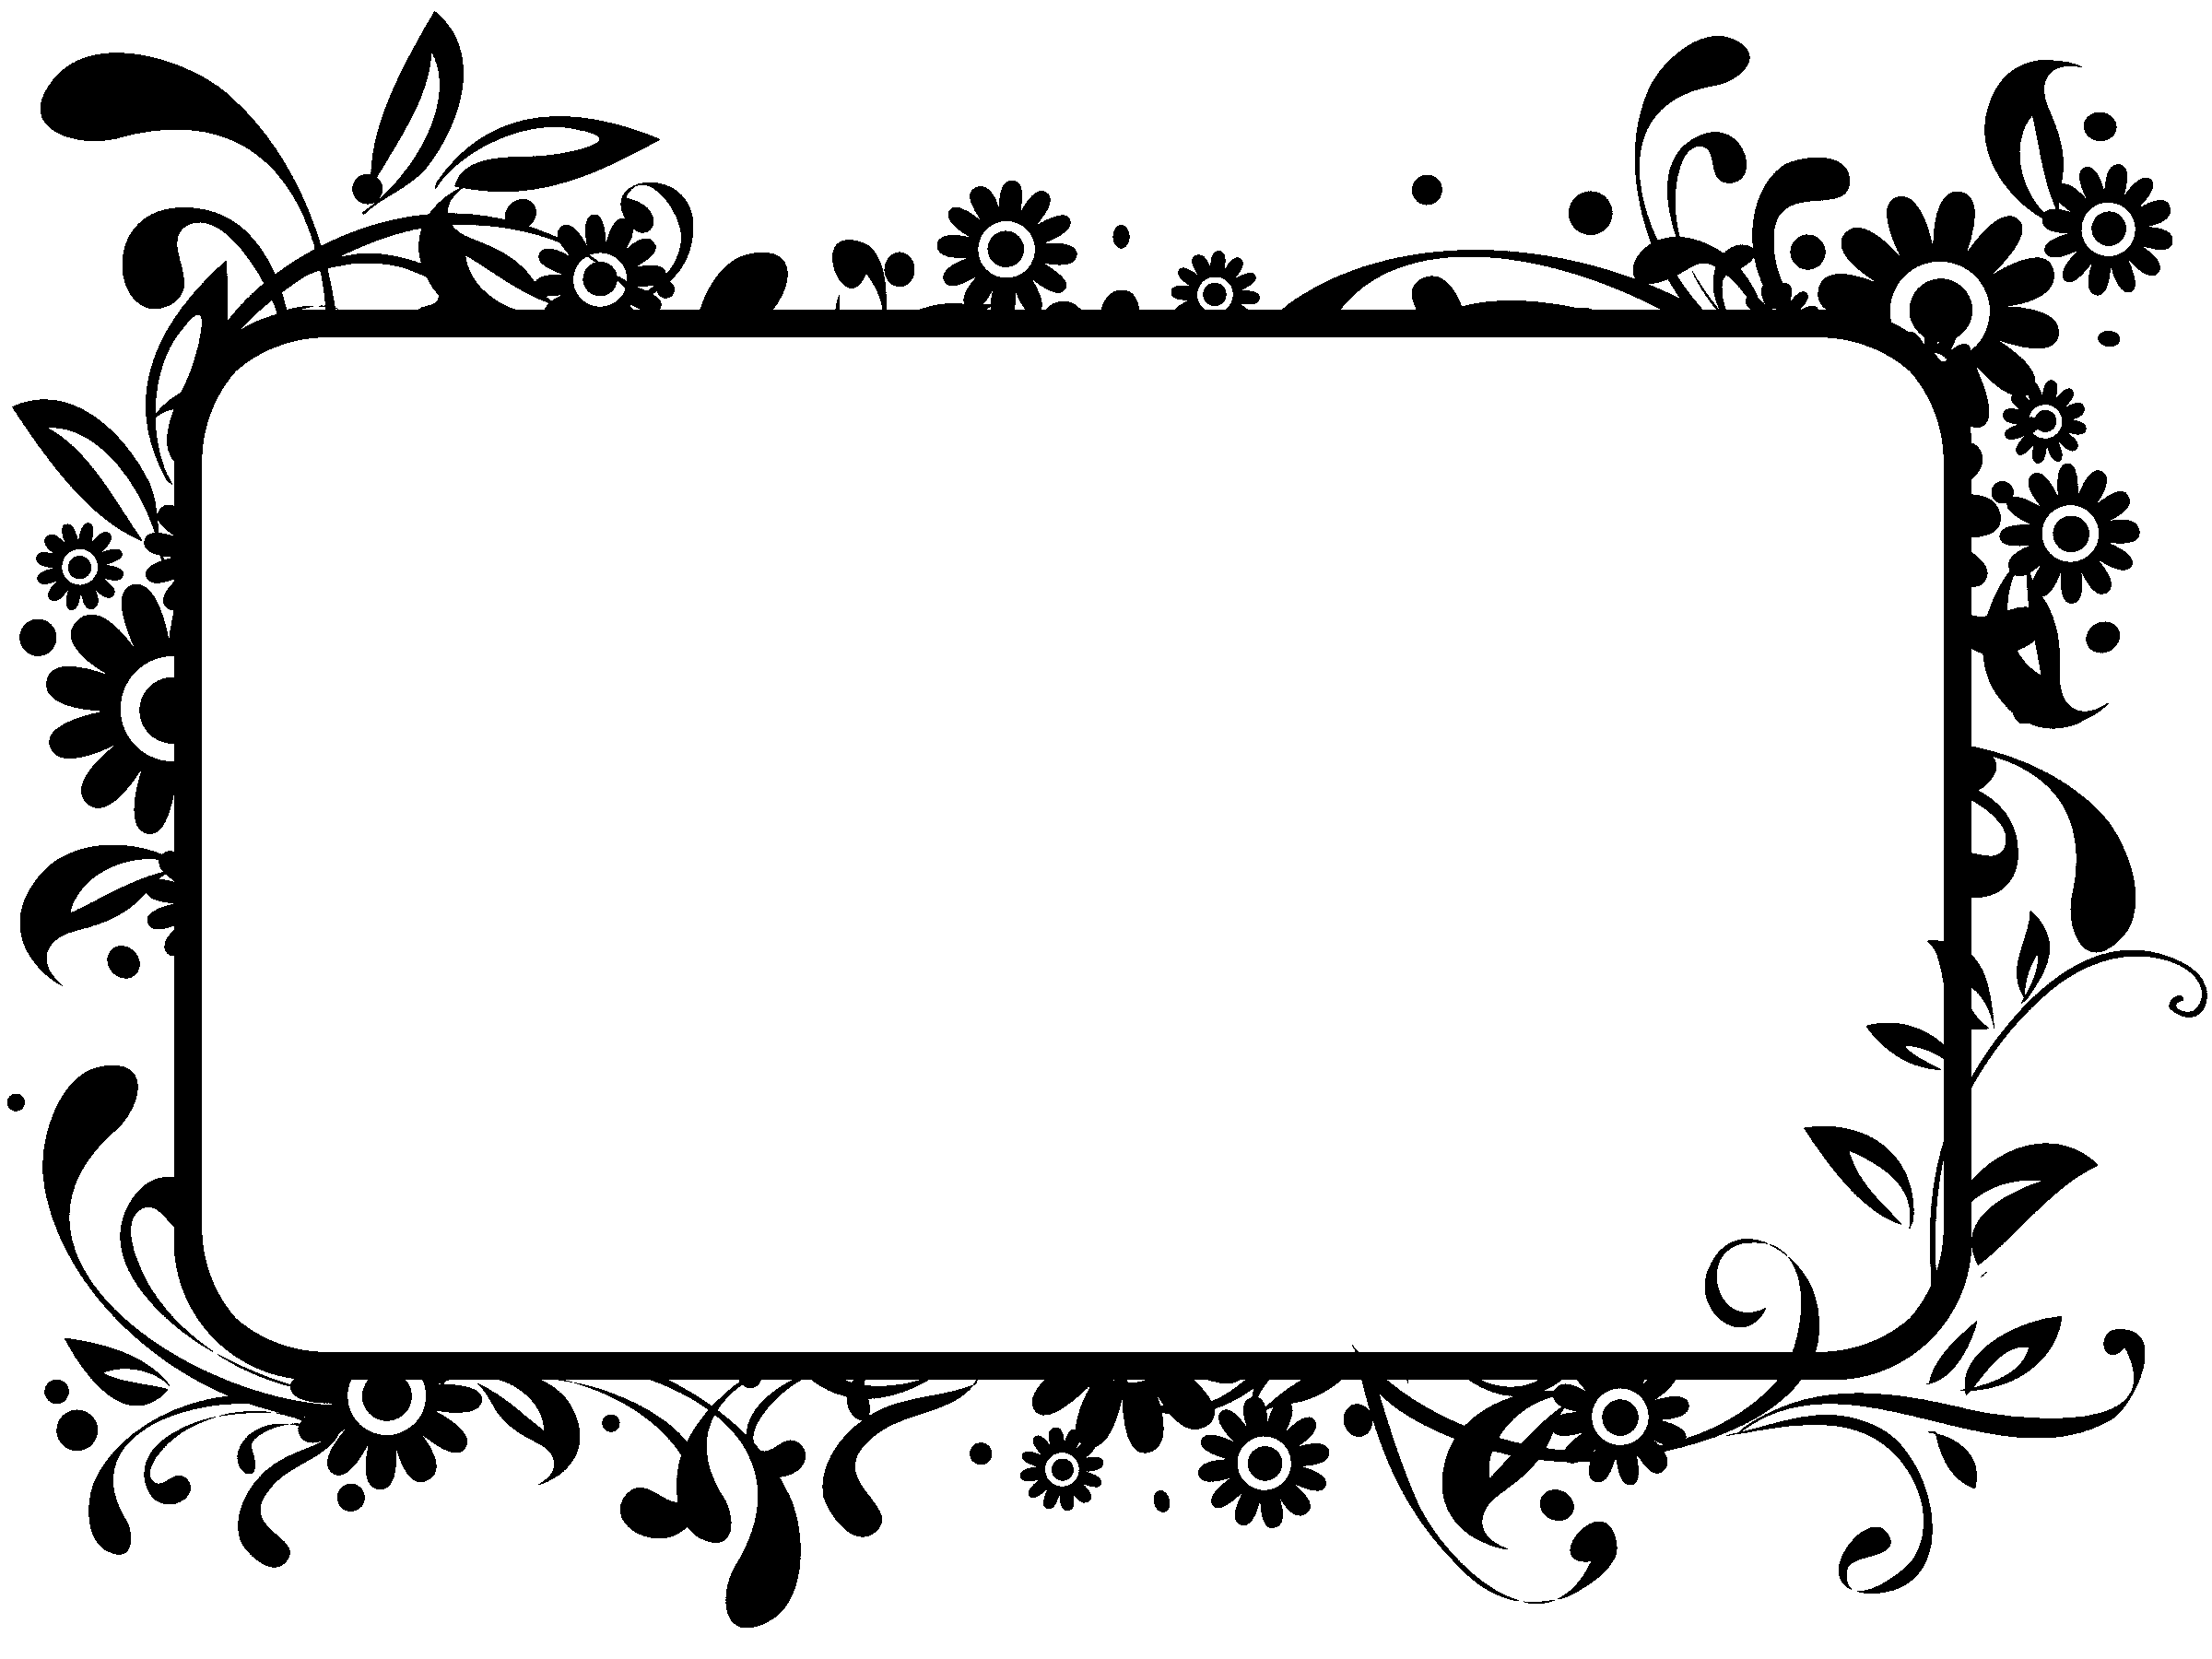 clip art borders and frames black and white - photo #34